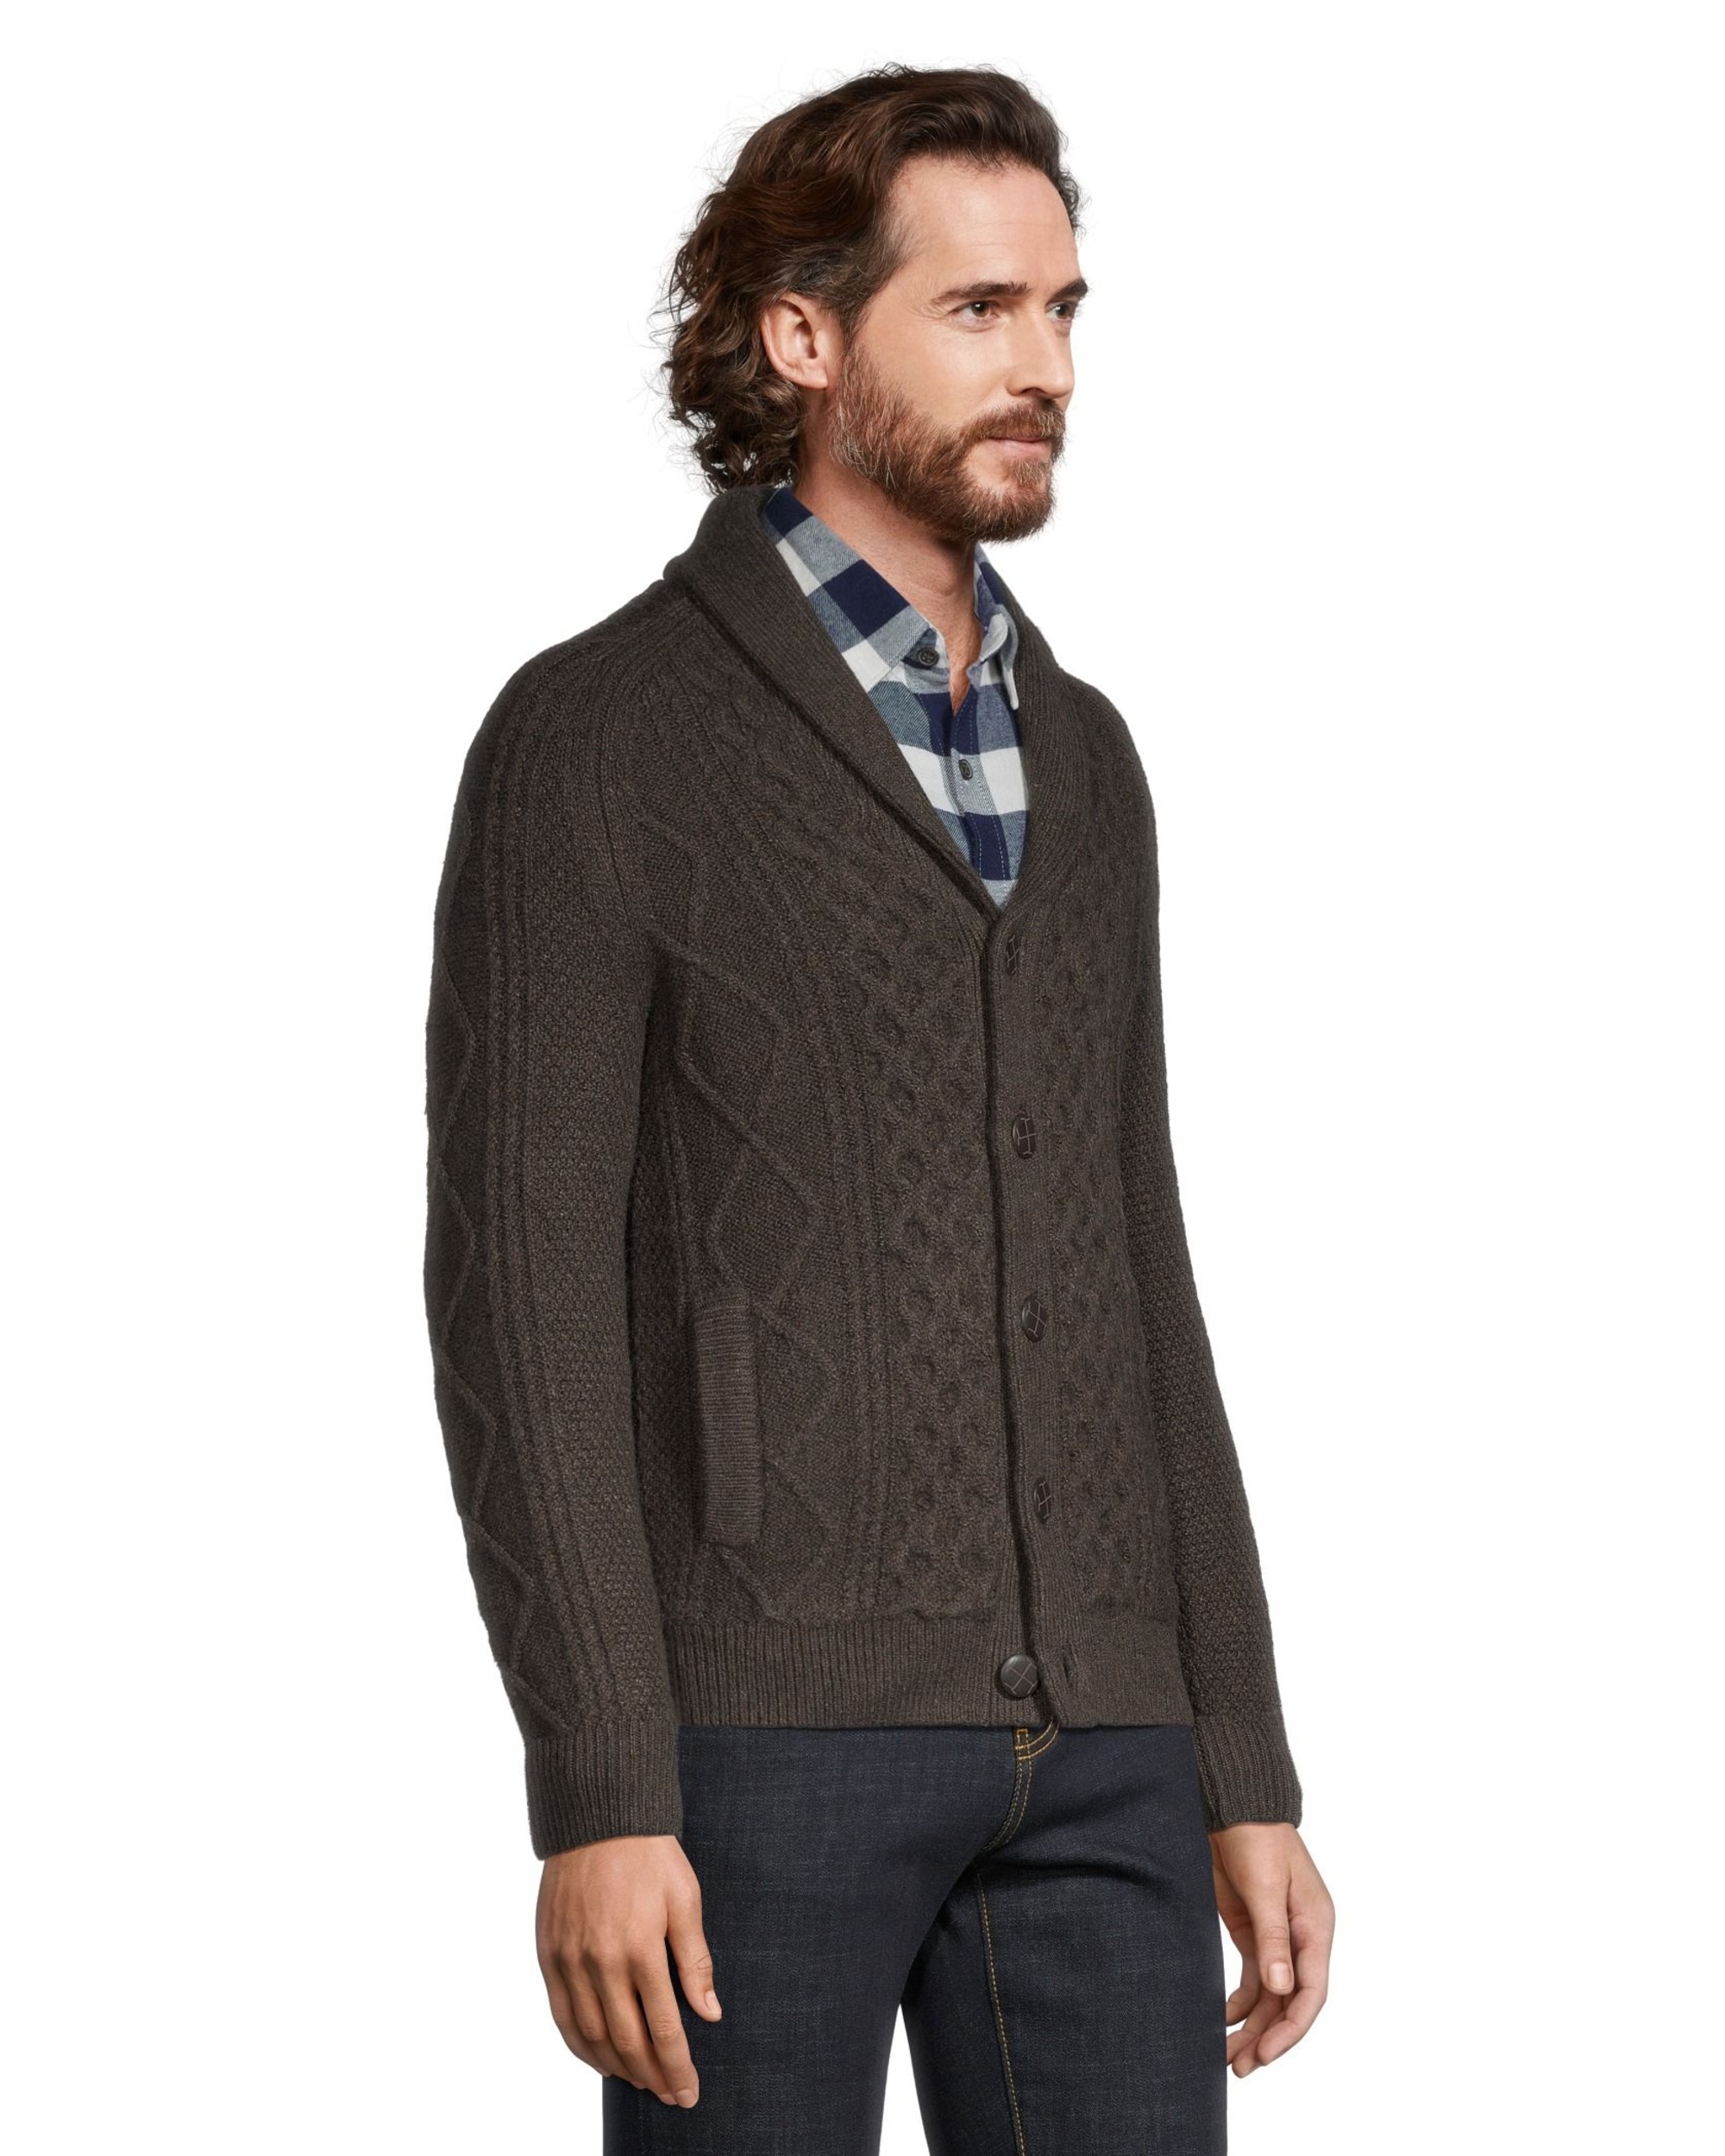 Windriver Men's Heritage Button Down Shawl Cardigan Sweater | Marks